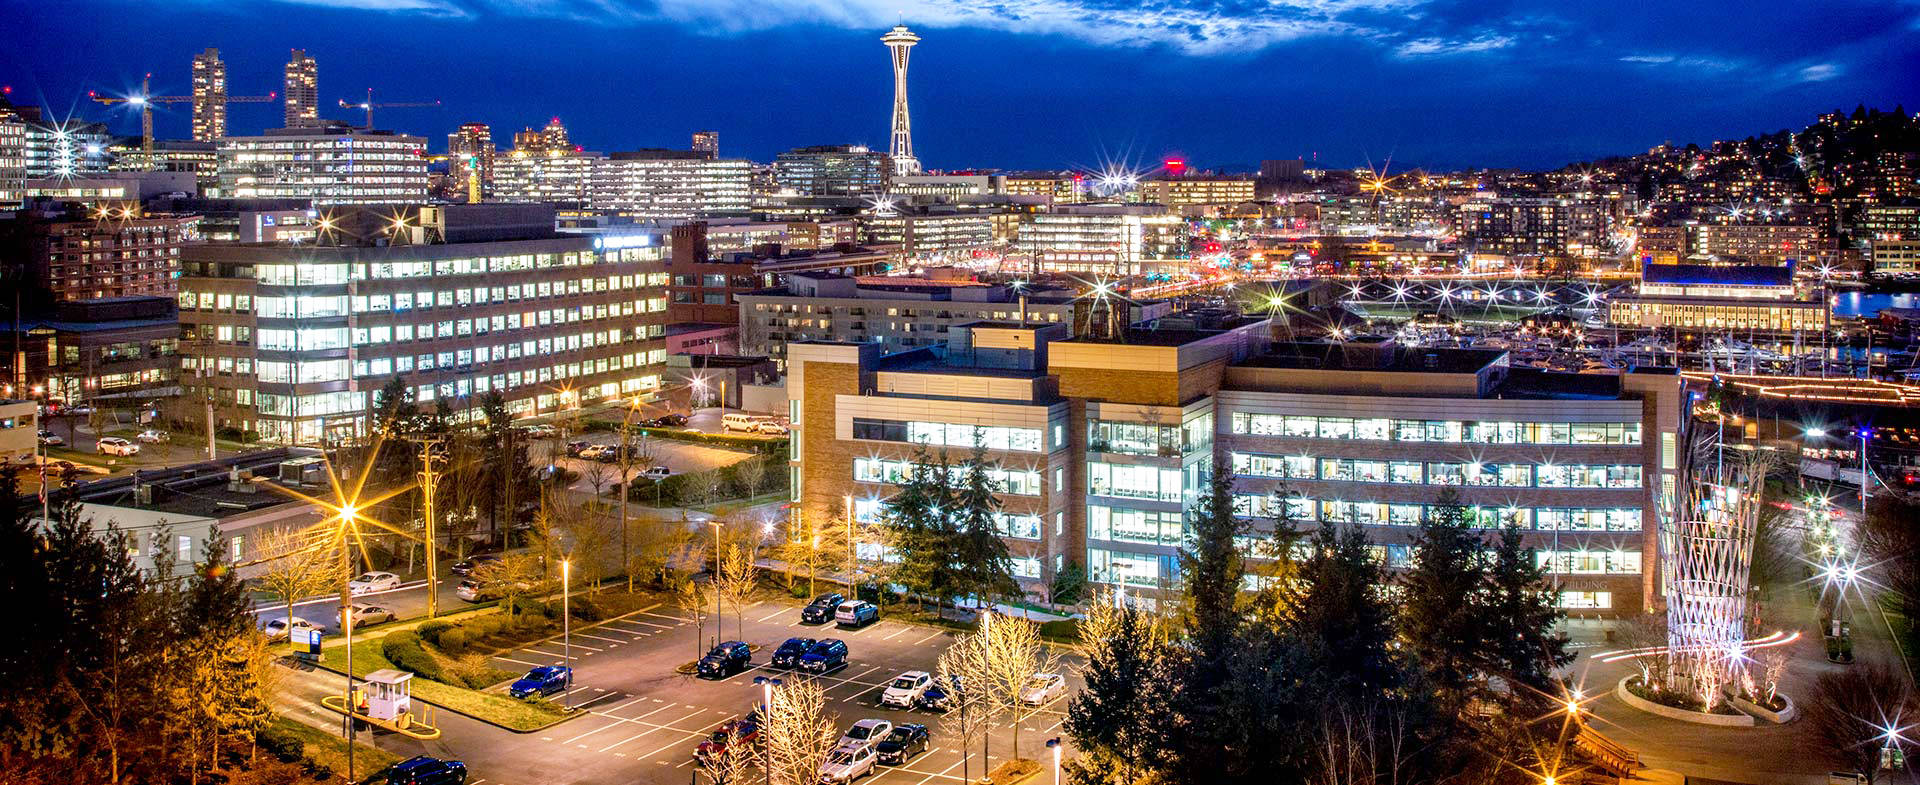 The Fred Hutchinson Cancer Research Center in Seattle. COURTESY PHOTO, Fred Hutchinson center